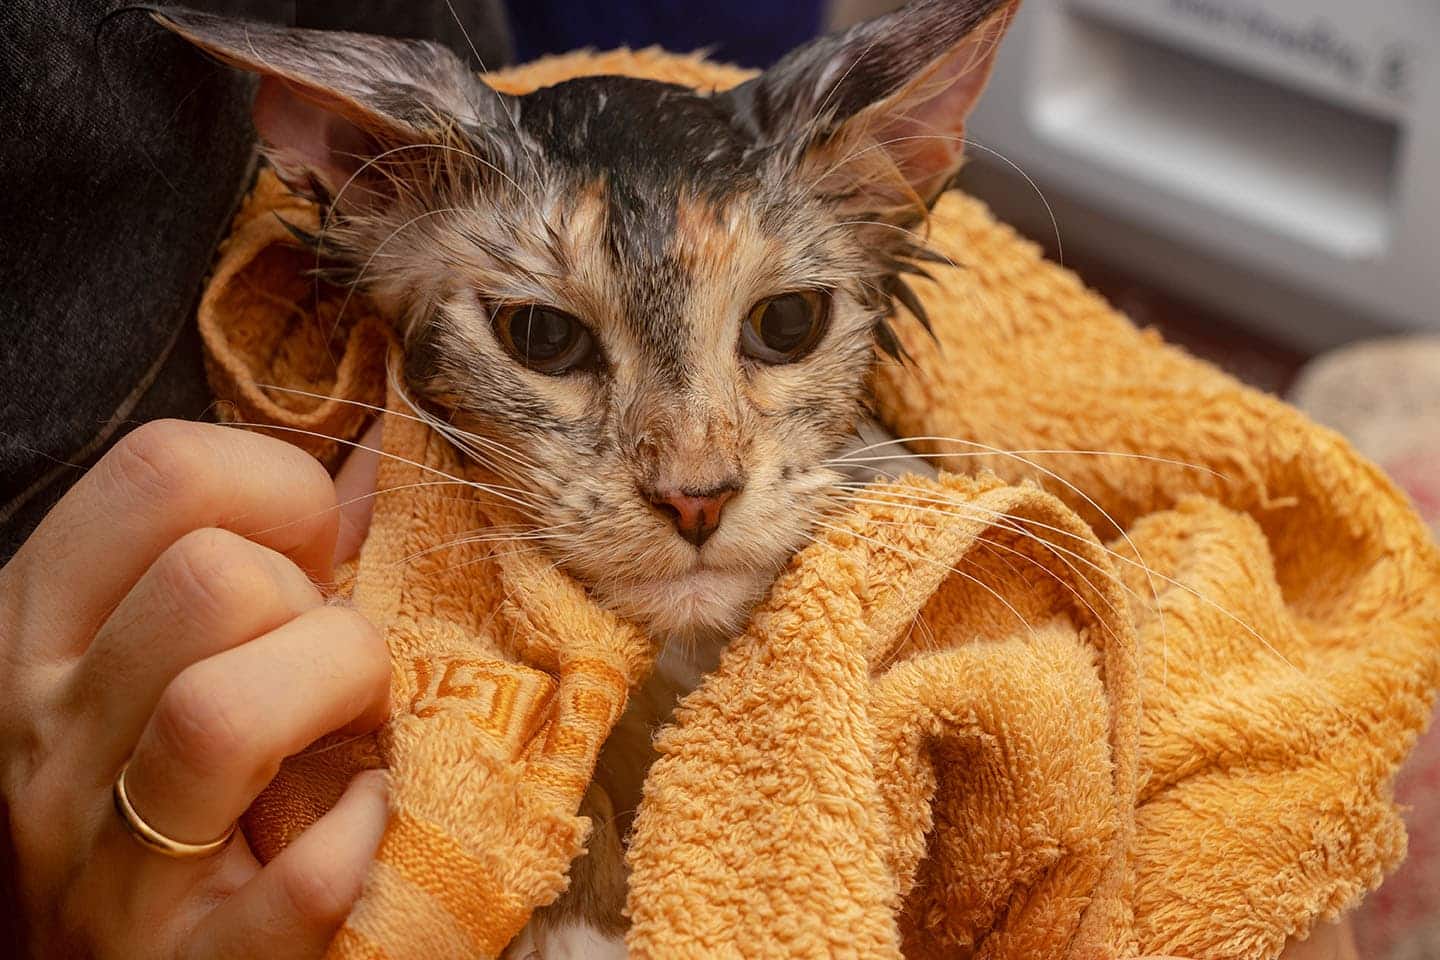 wiping cat with damp towel